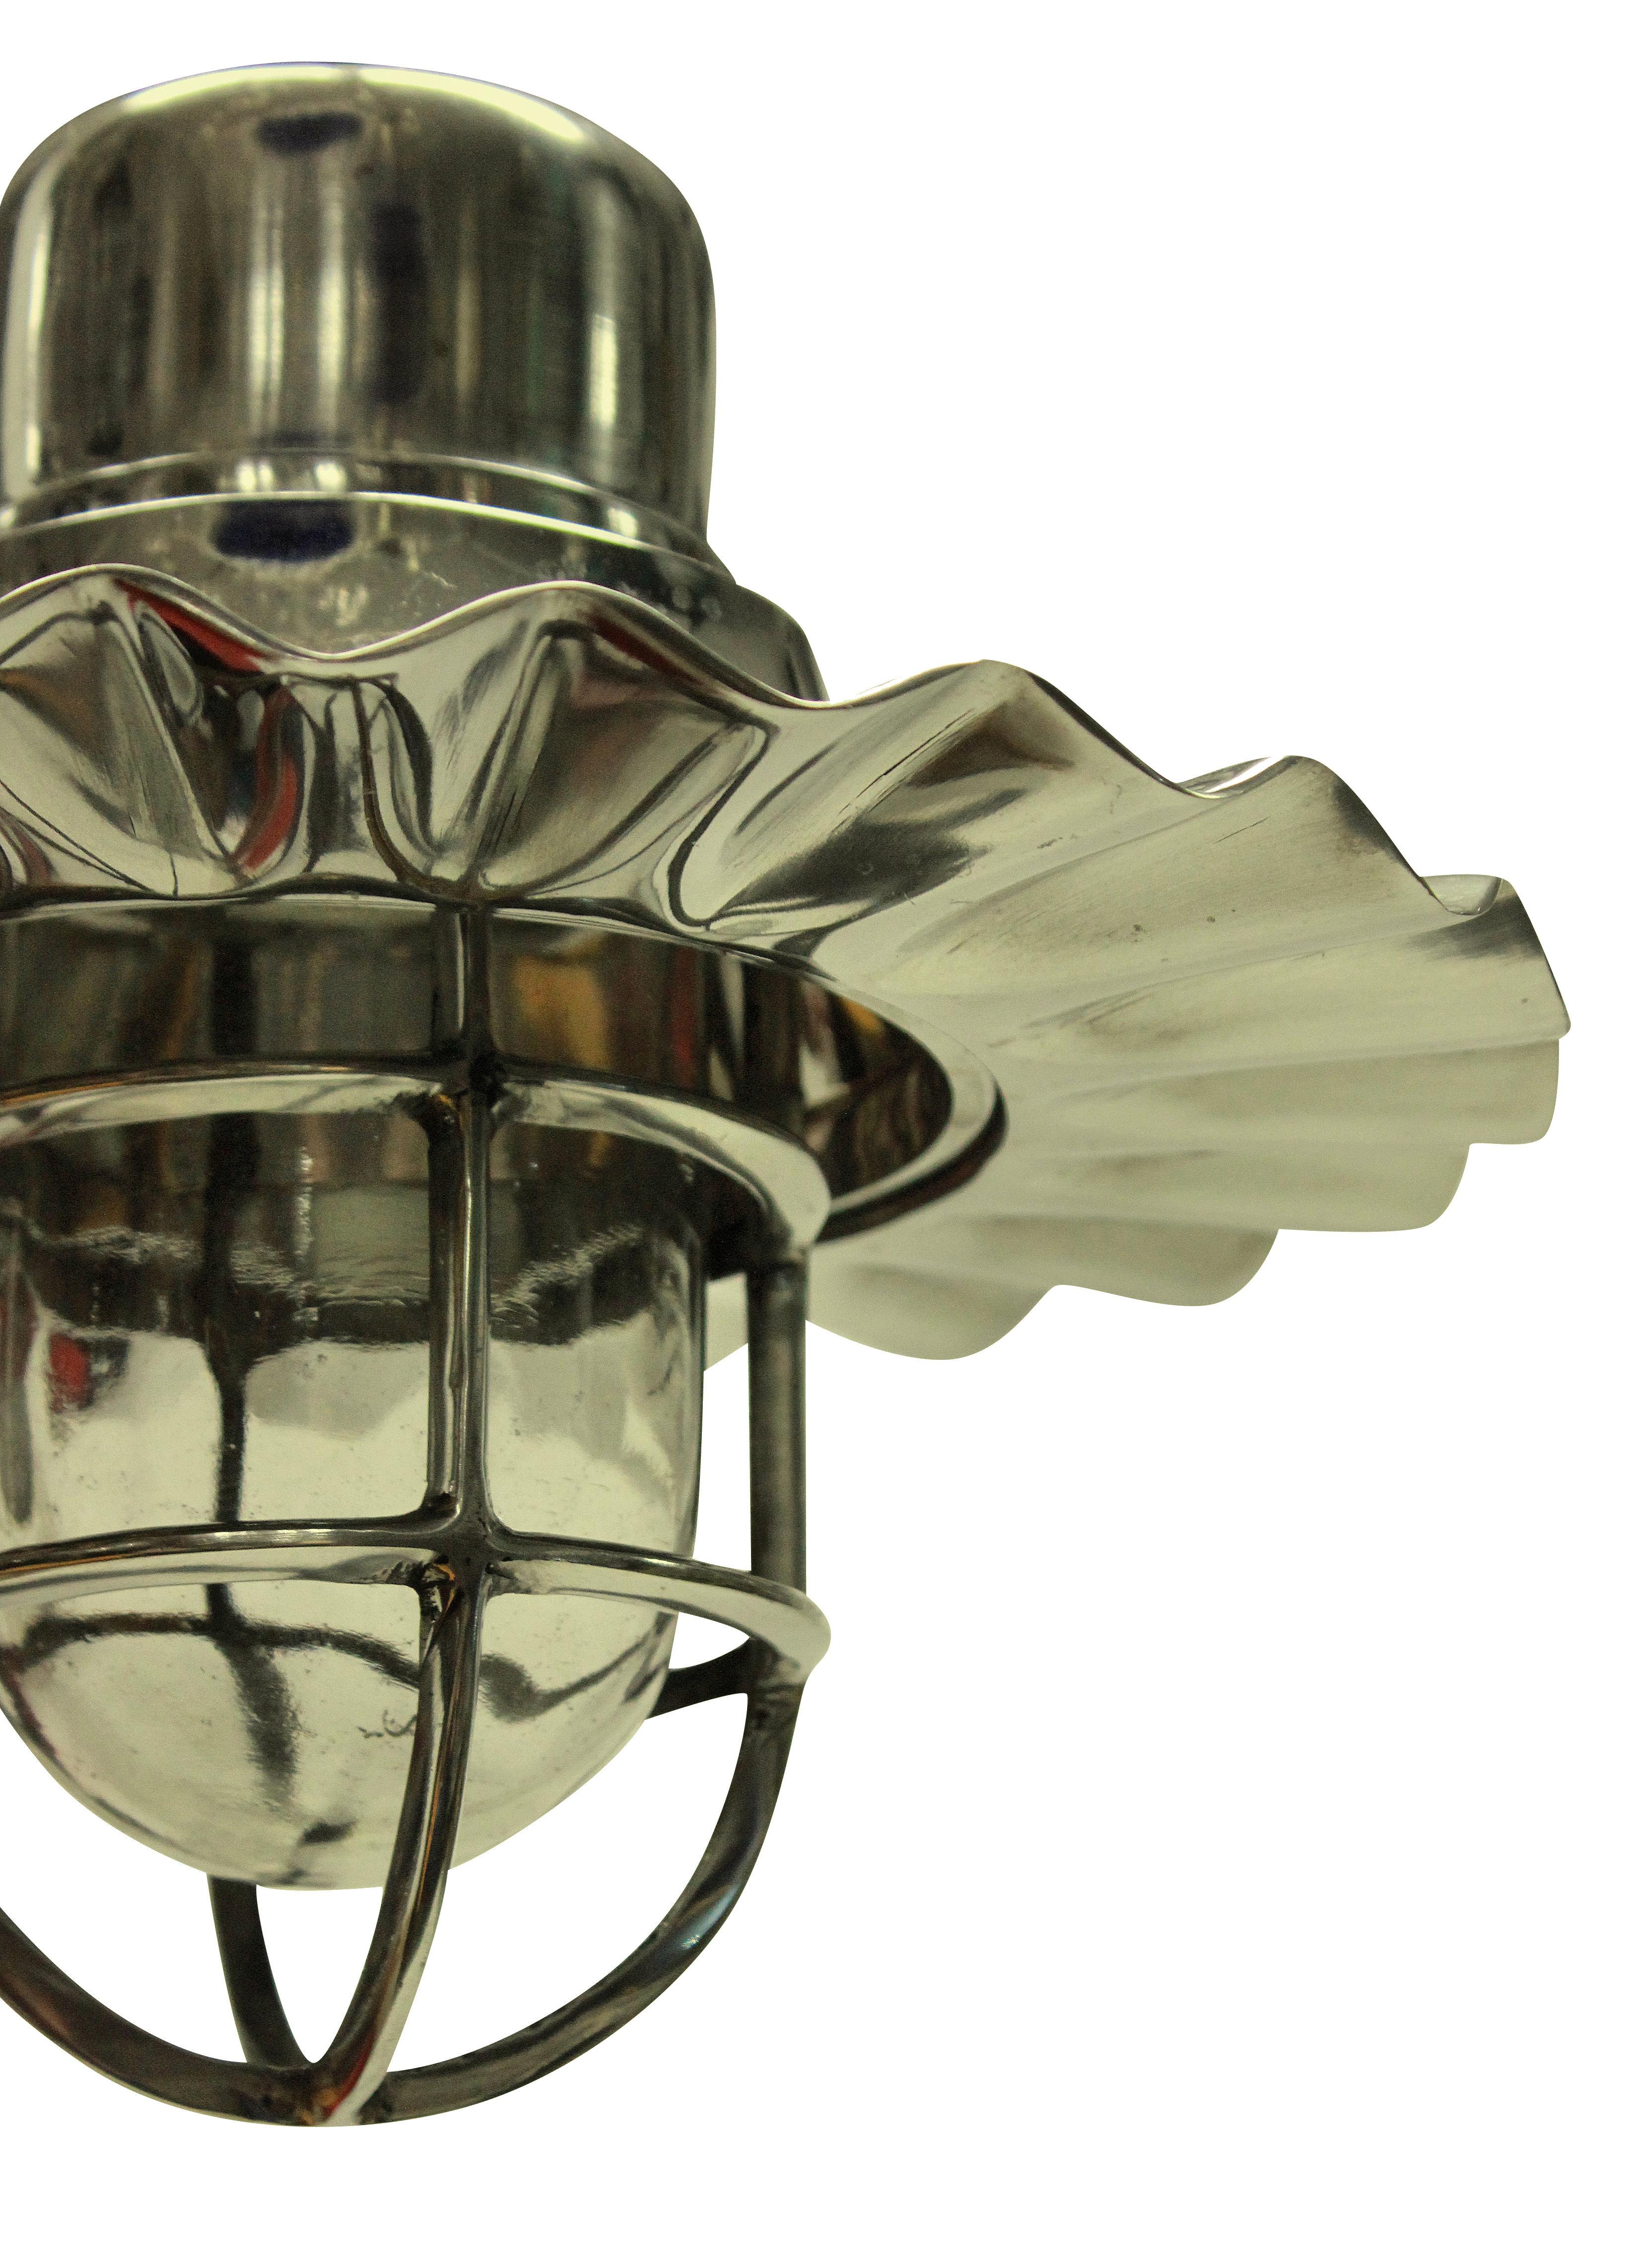 A set of four ship's hanging lights in nickel plate. With an interior glass case housing the light bulb.